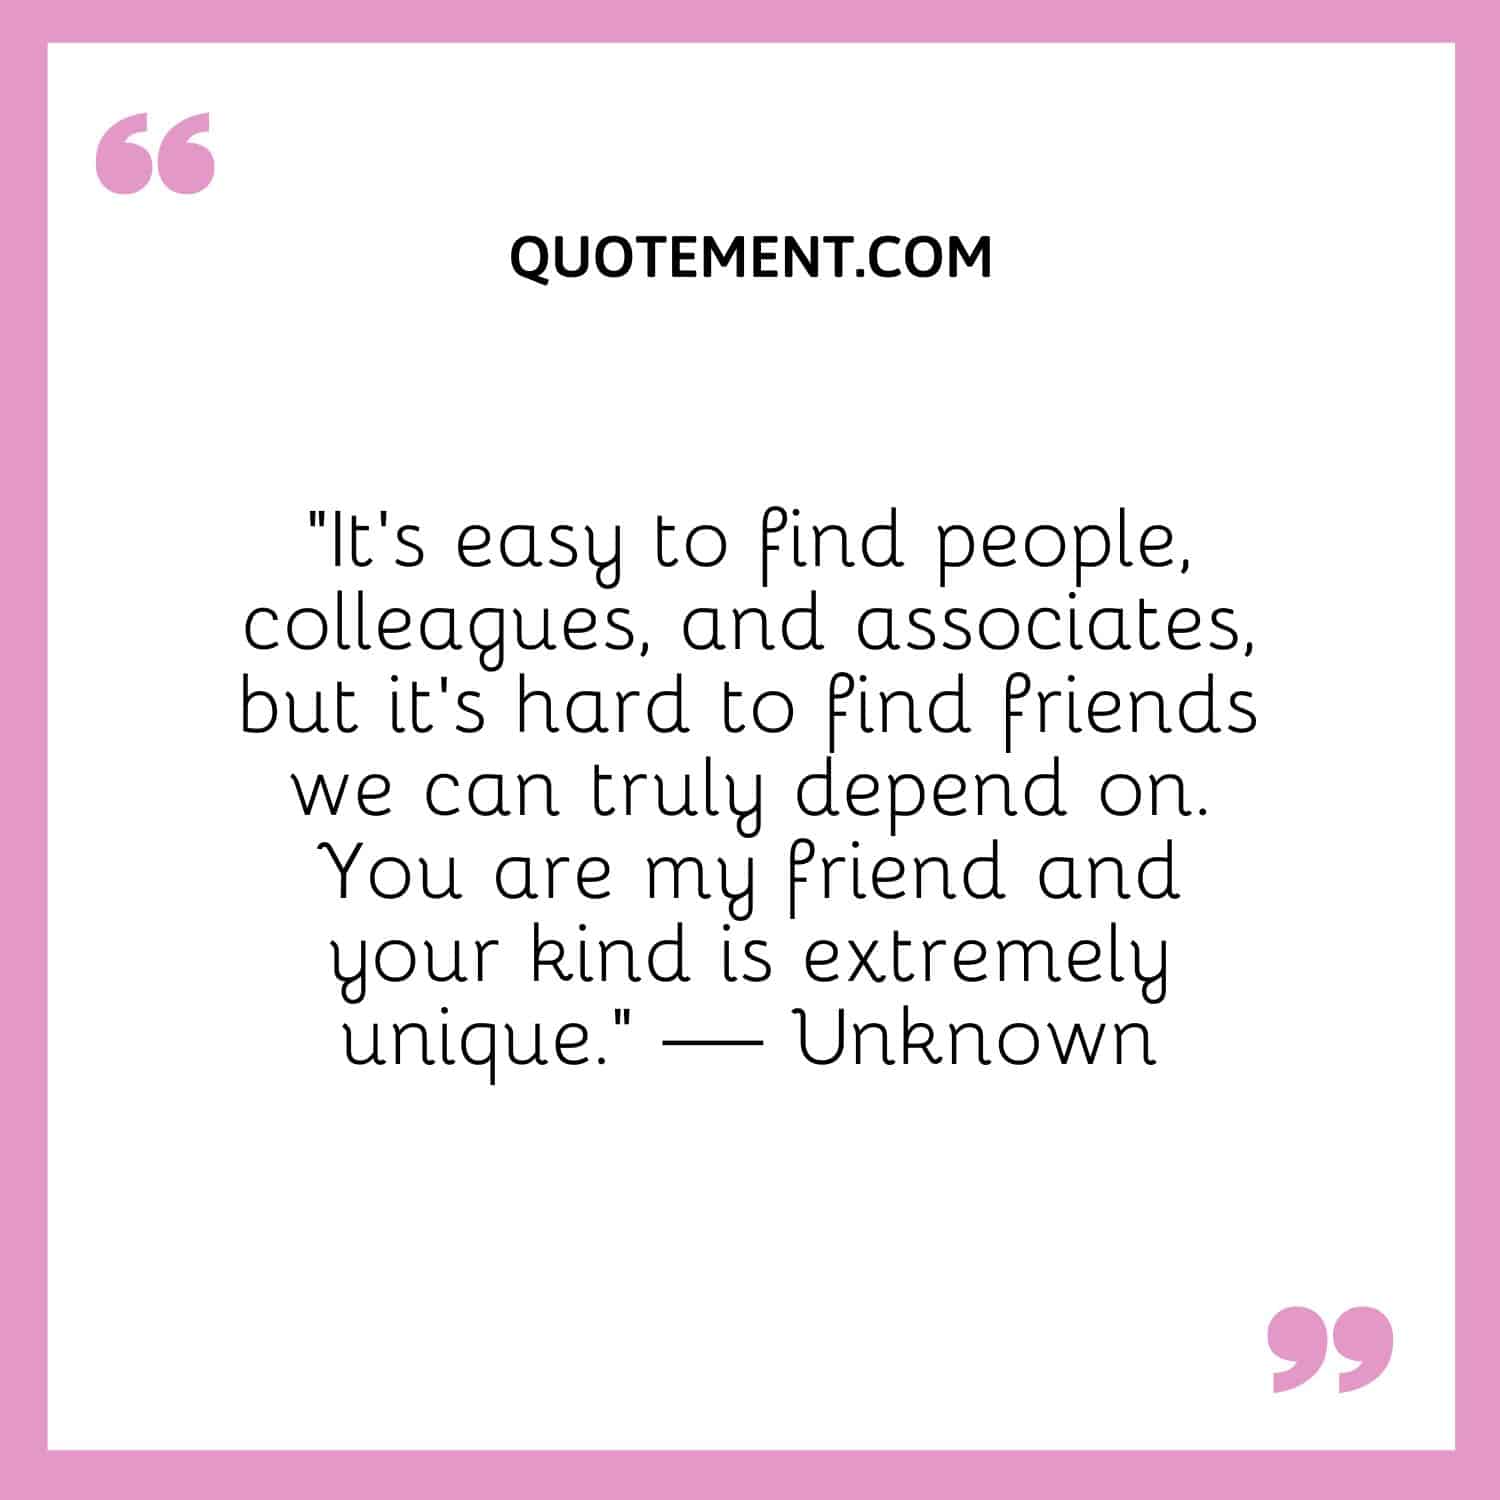 It’s easy to find people, colleagues, and associates, but it’s hard to find friends we can truly depend on